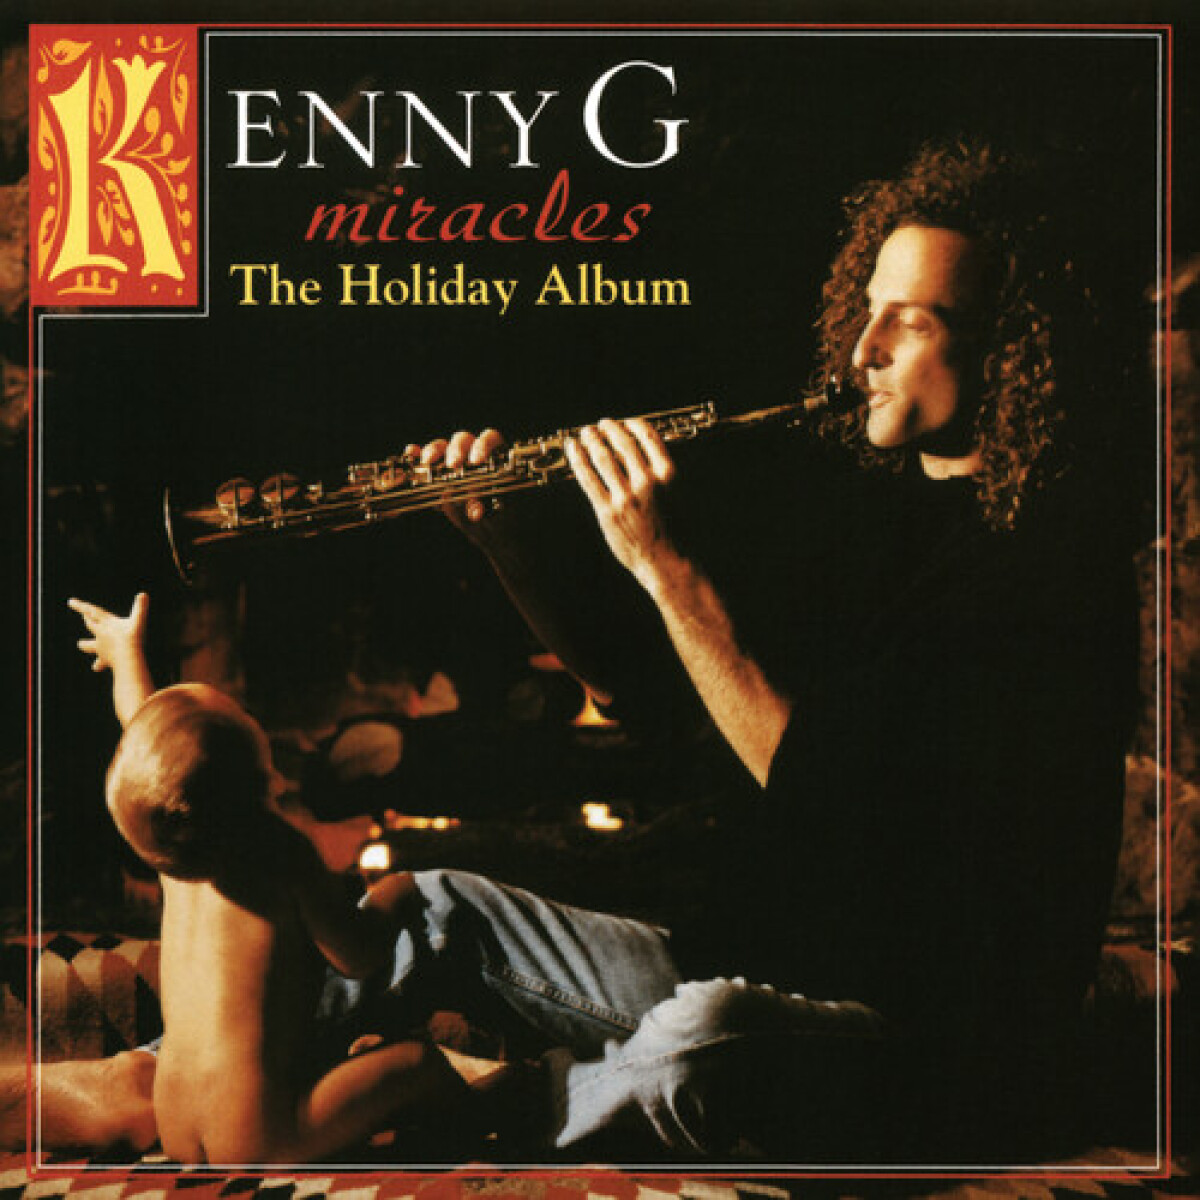 (l) Kenny G - Miracles: A Holiday Album - Vinilo 